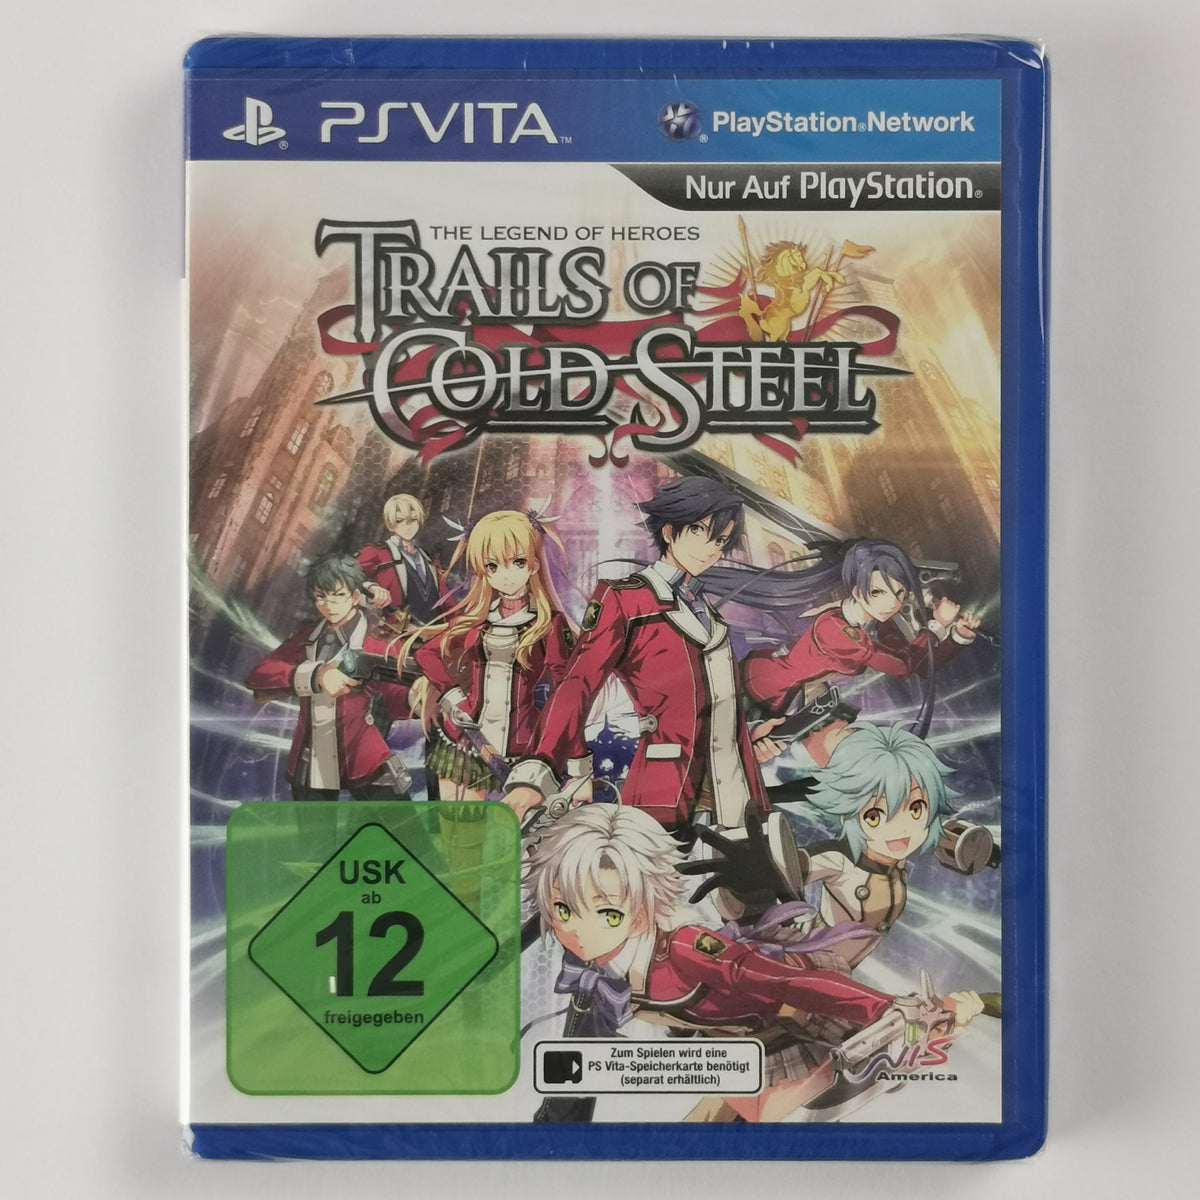 The Legend of Heroes Trails of C. [PSV]